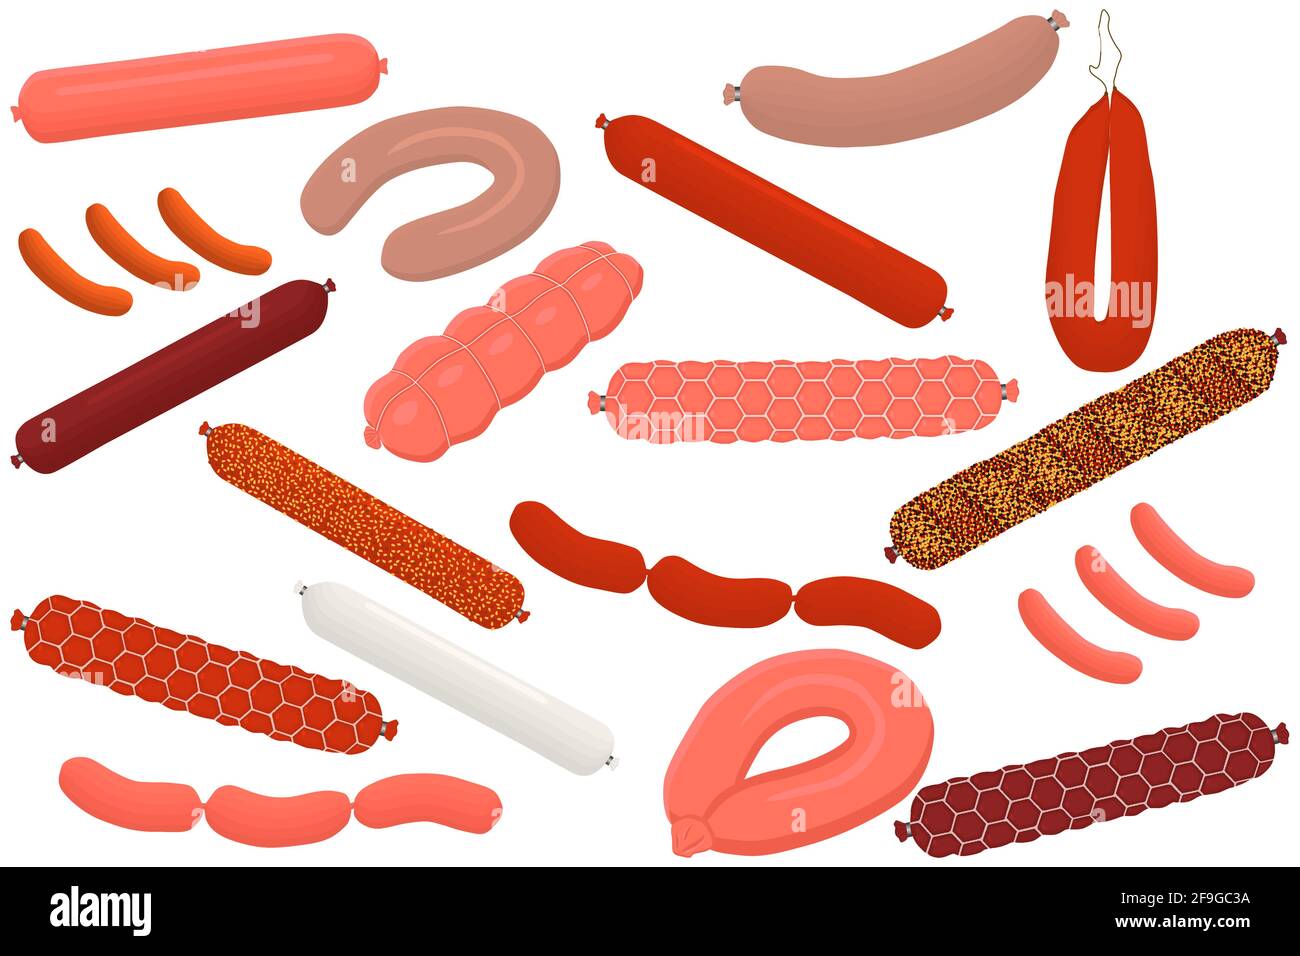 Illustration on theme big set different types delicatessen meat sausages. Delicatessen consisting of collectible natural tasty food meat sausages. Eat Stock Vector